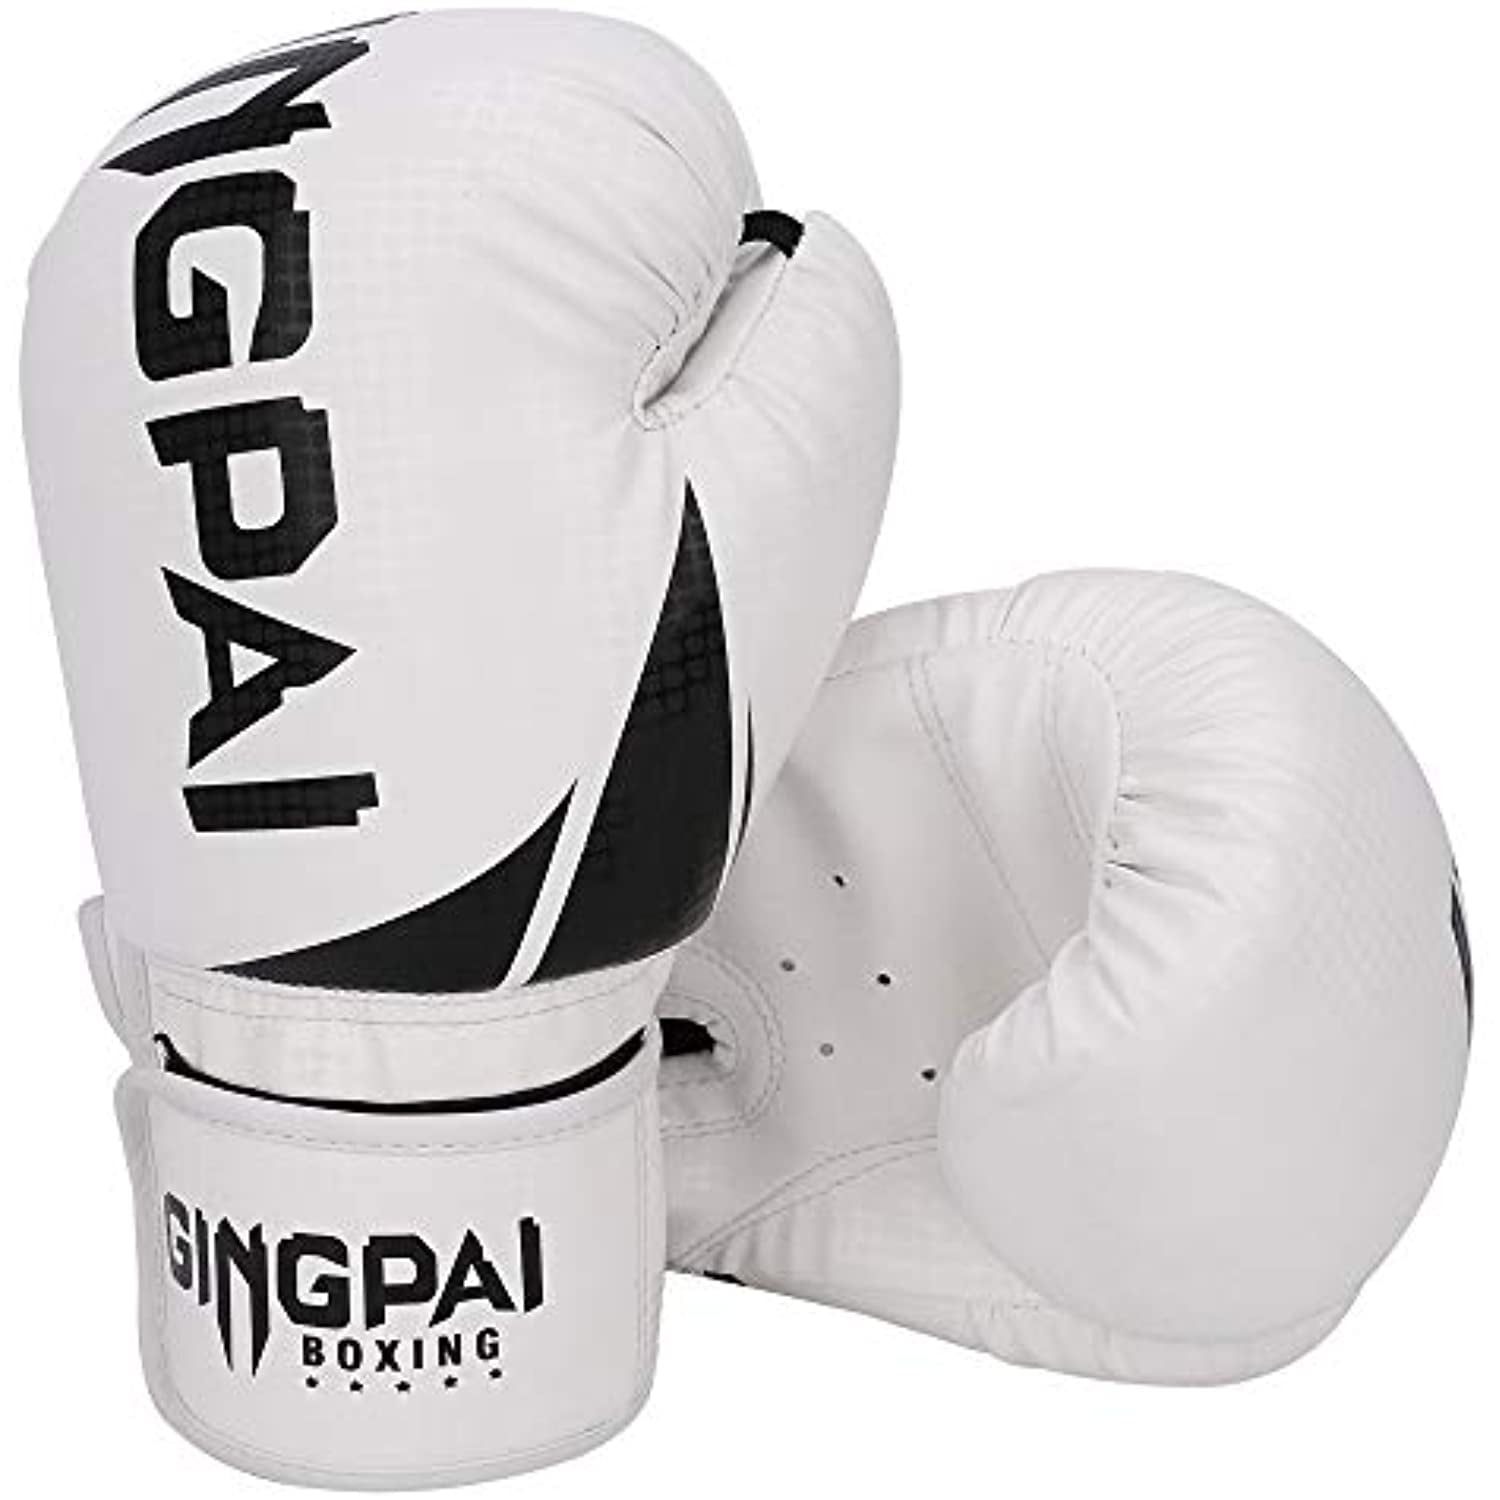 GINGPAI Boxing Gloves Muay Thai Kickboxing Professional Gloves for Punch Bag 